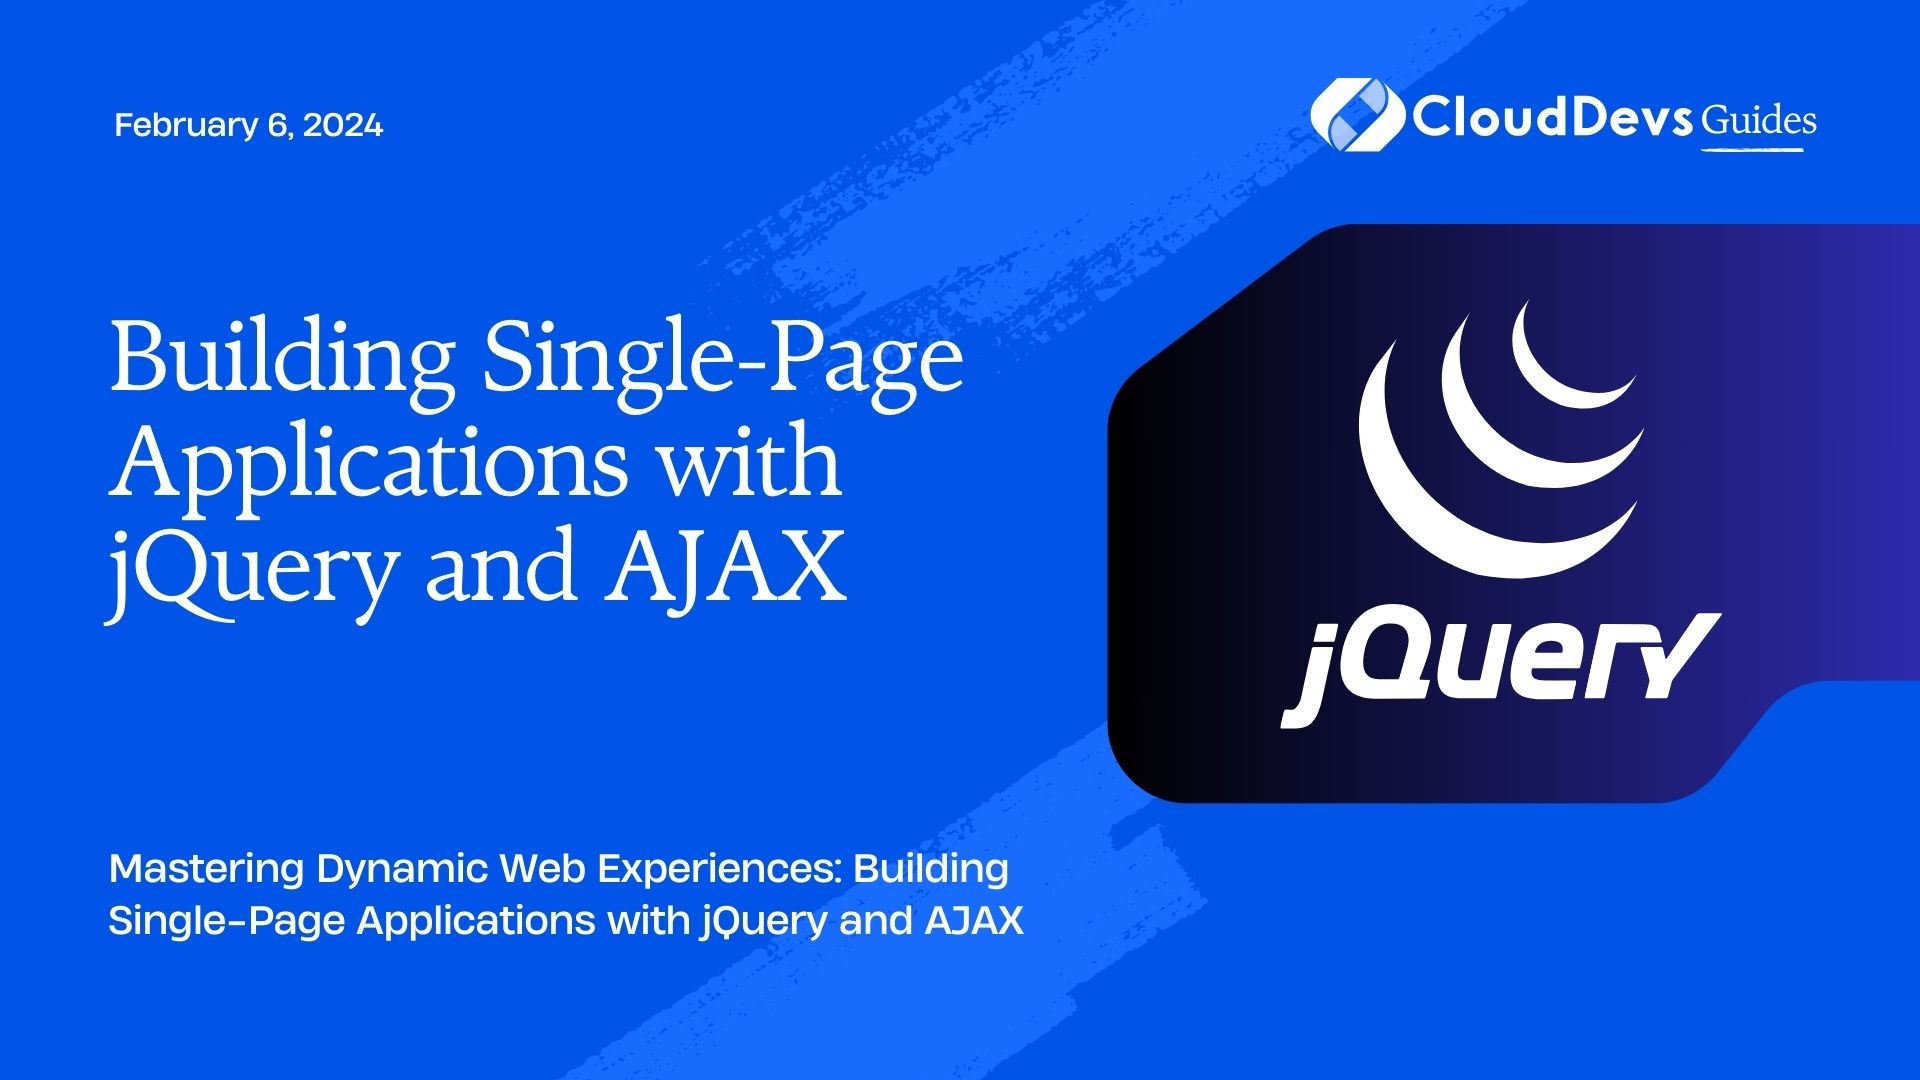 Building Single-Page Applications with jQuery and AJAX